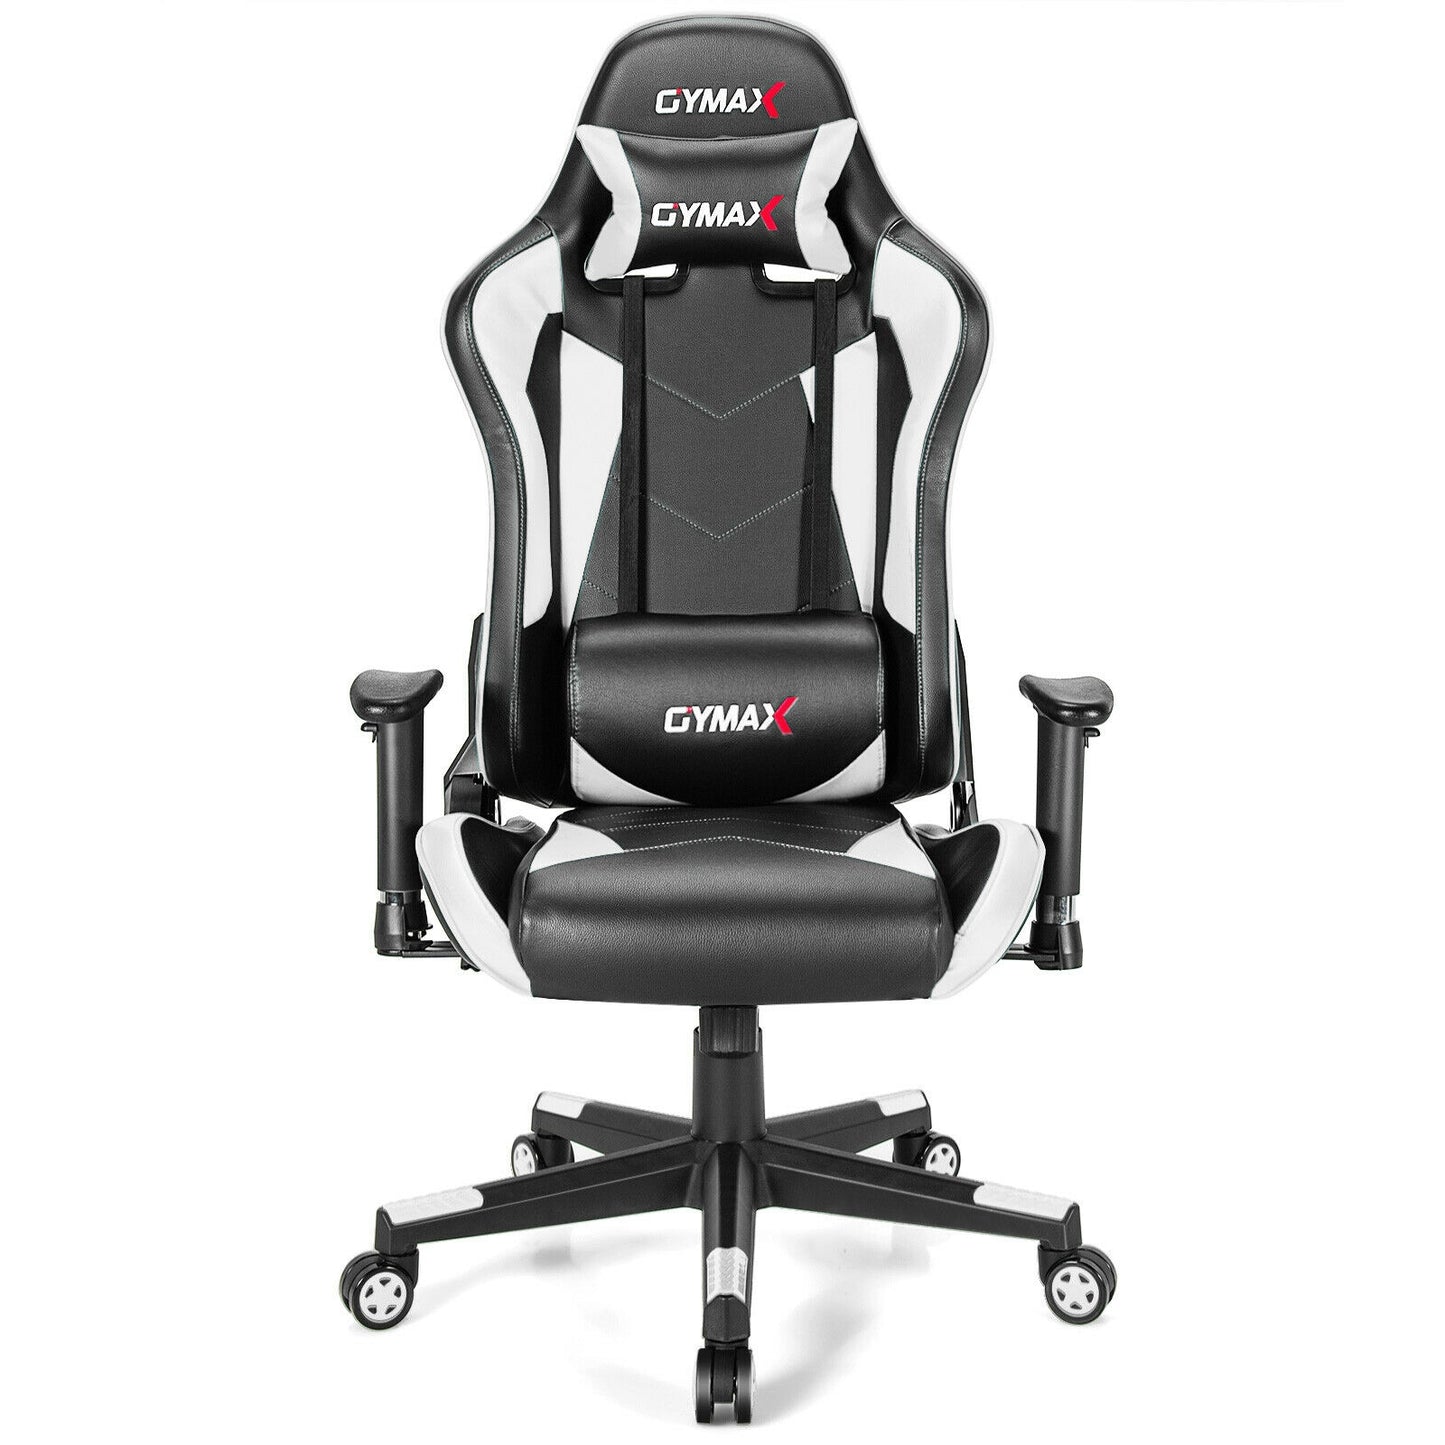 Gaming Chair Adjustable Swivel Racing Style Computer Office Chair-White